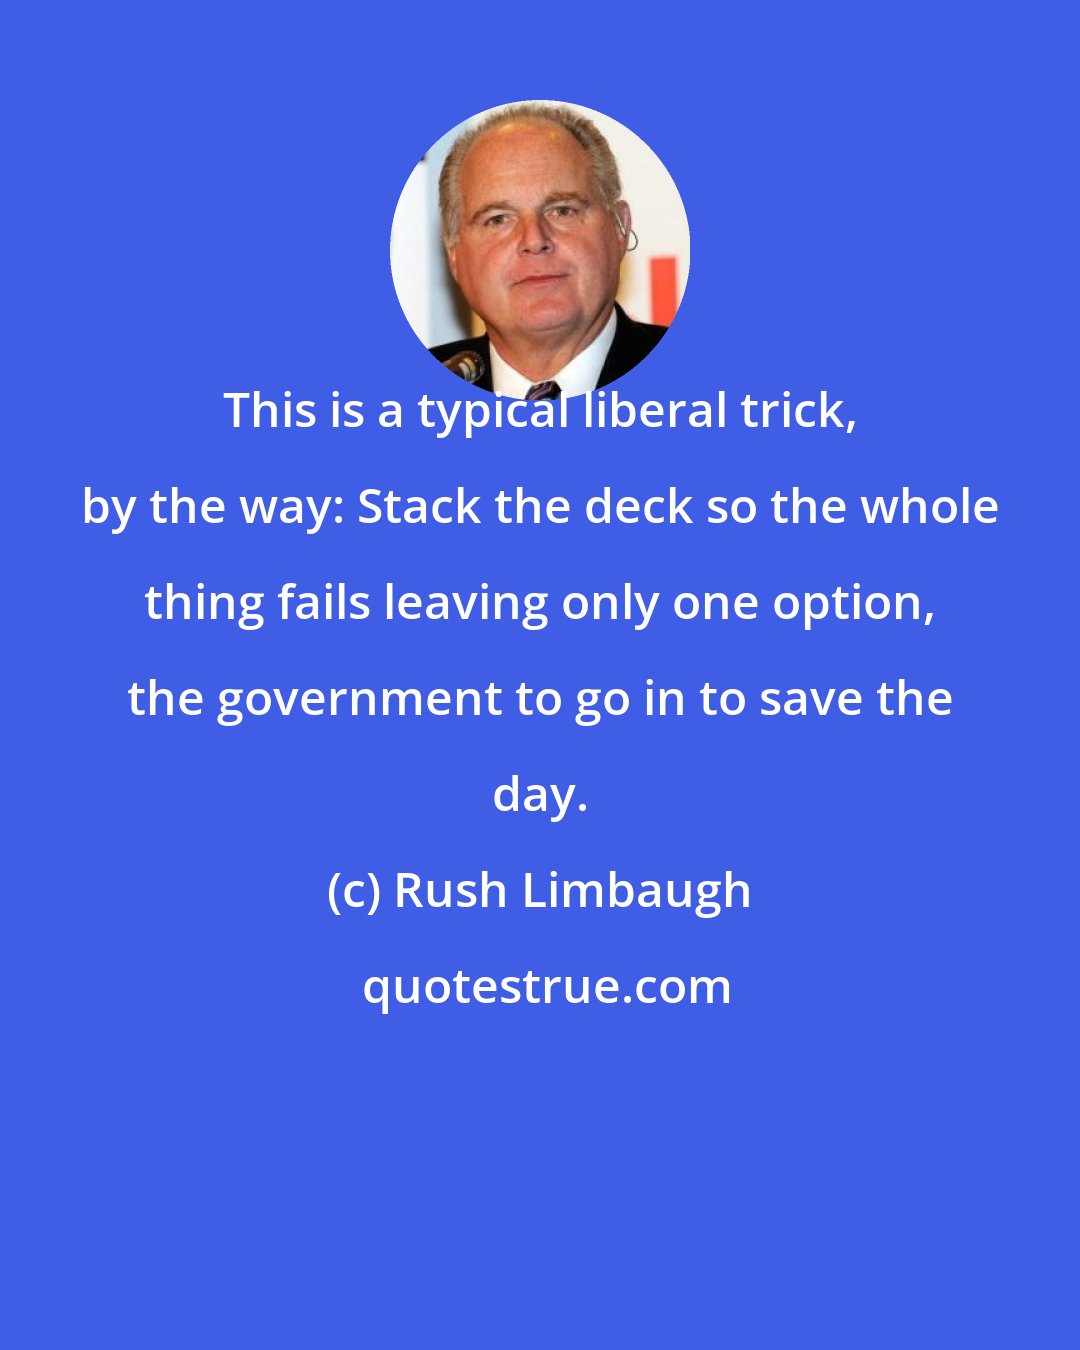 Rush Limbaugh: This is a typical liberal trick, by the way: Stack the deck so the whole thing fails leaving only one option, the government to go in to save the day.